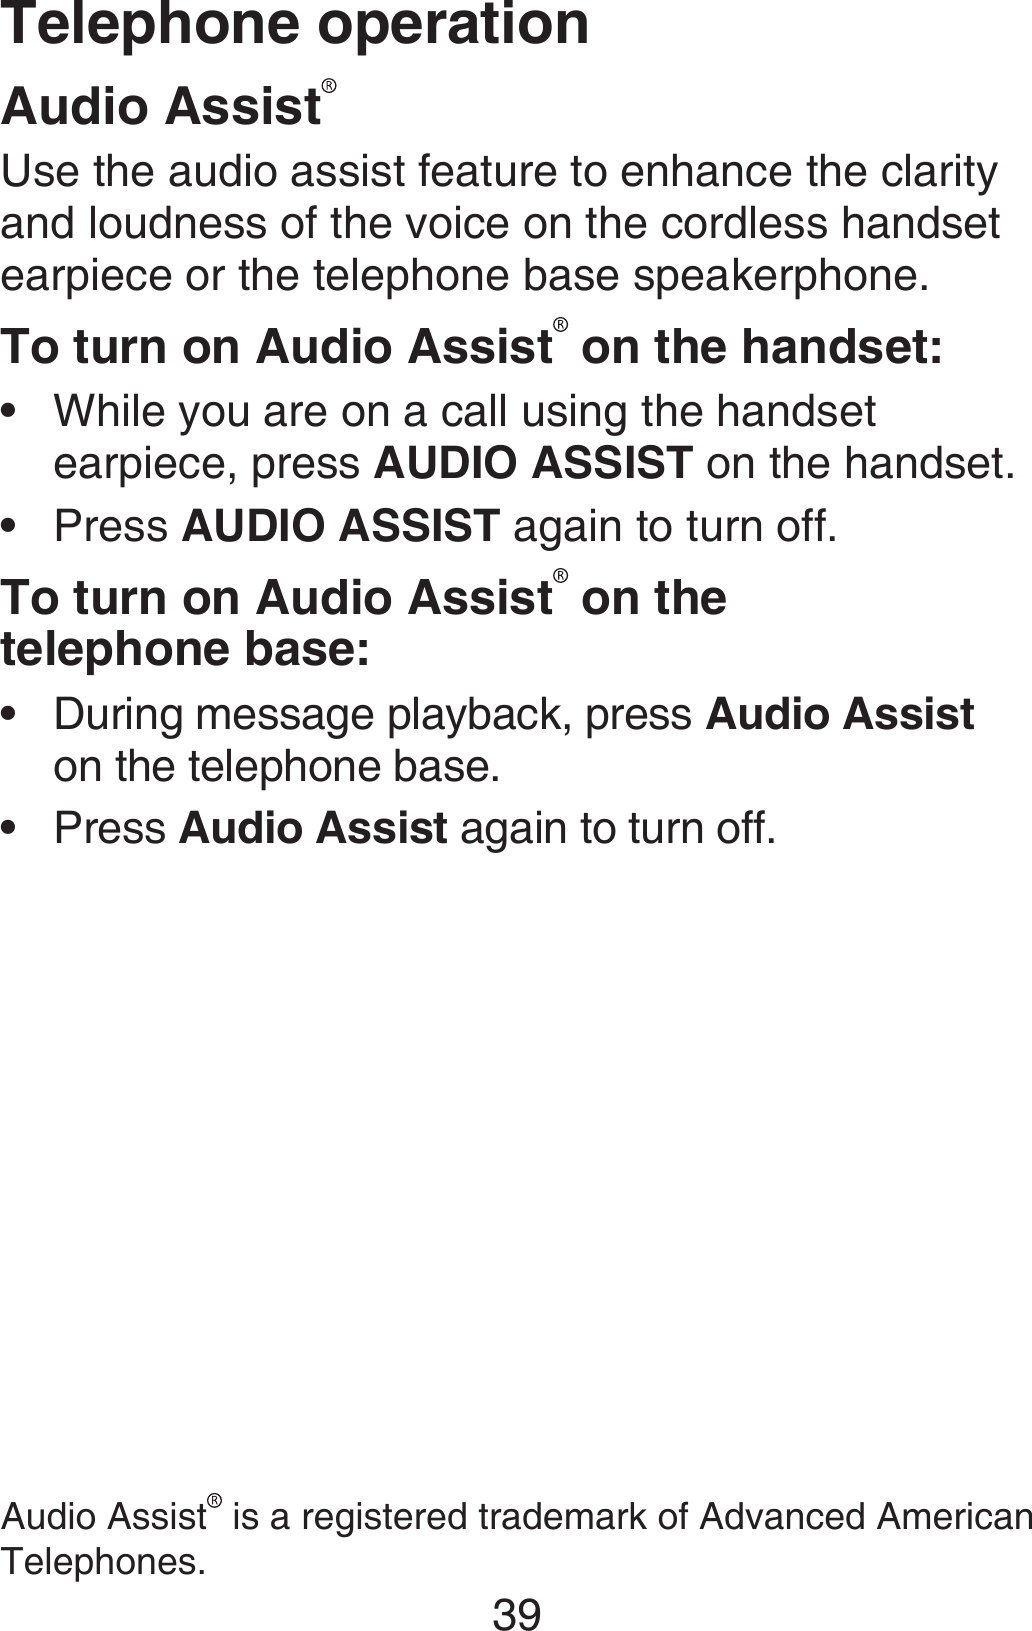 Telephone operation39Audio AssistUse the audio assist feature to enhance the clarity and loudness of the voice on the cordless handset earpiece or the telephone base speakerphone.To turn on Audio Assist  on the handset:While you are on a call using the handset earpiece, press AUDIO ASSIST on the handset.Press AUDIO ASSIST again to turn off.To turn on Audio Assist  on the  telephone base:During message playback, press Audio Assist on the telephone base.Press Audio Assist again to turn off.••••Audio Assist  is a registered trademark of Advanced American Telephones.